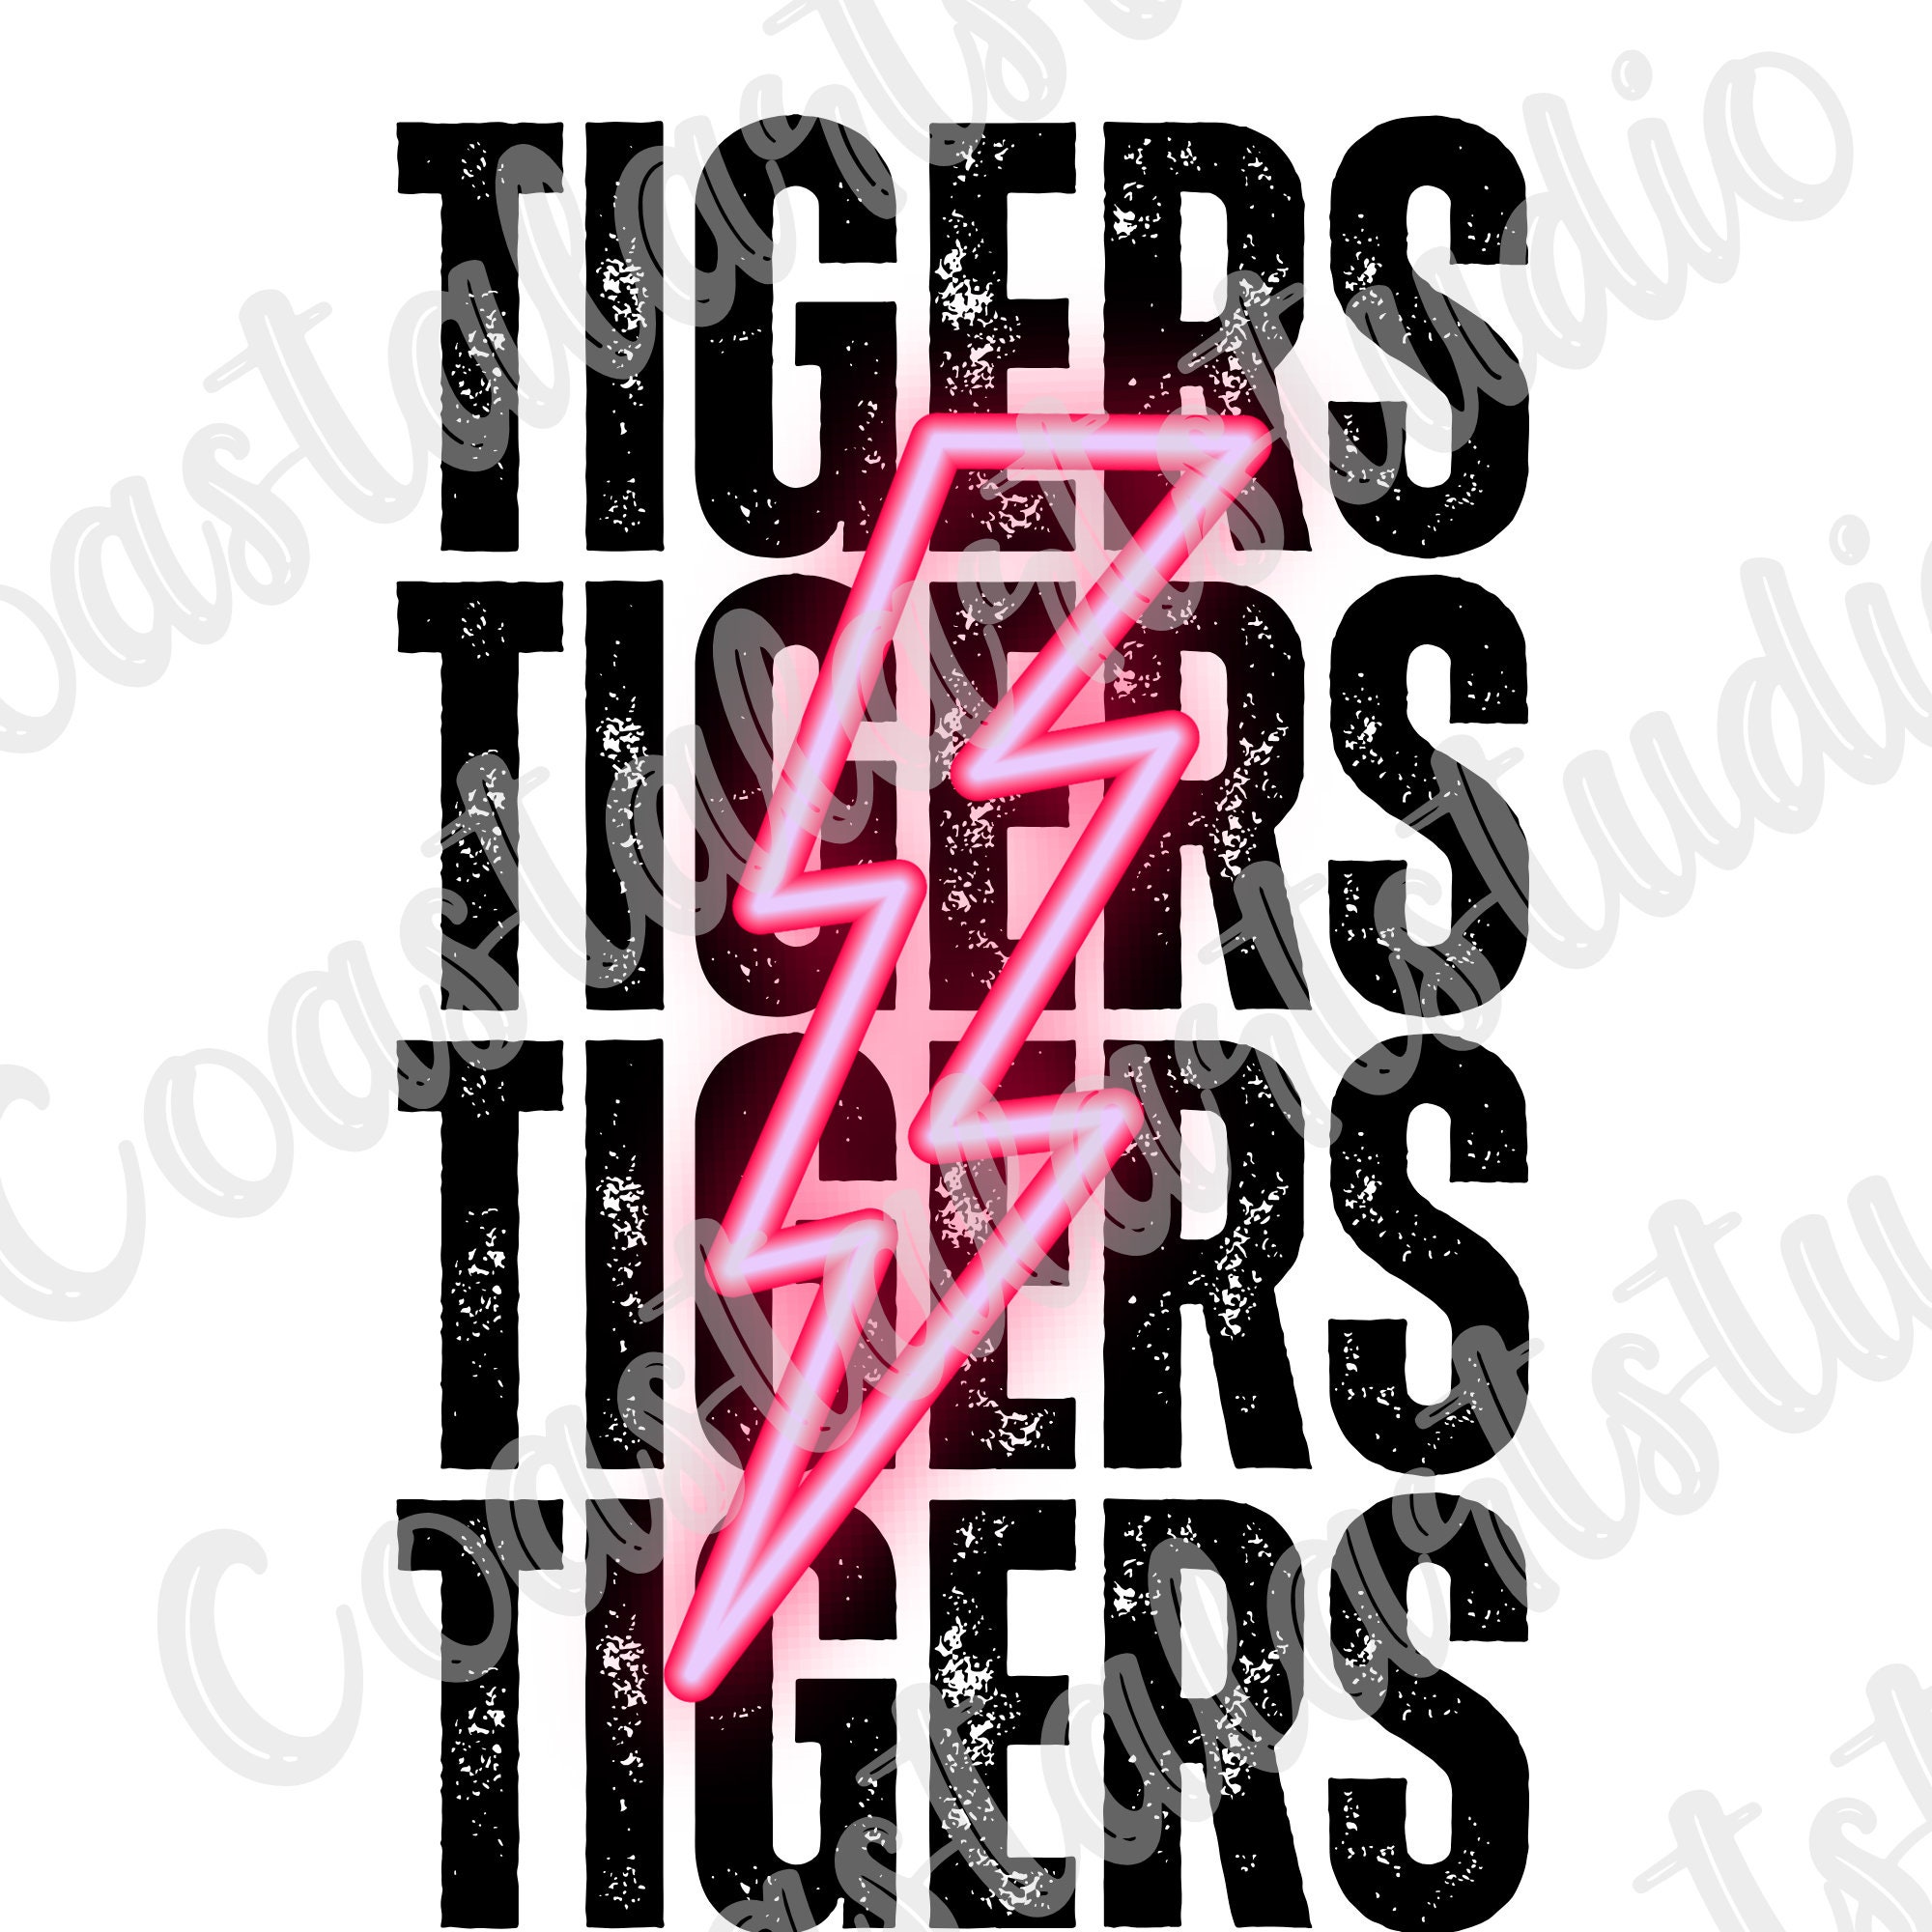 The Toy Tiger - Louisville, KY (Neon Sign) Sticker for Sale by dcollin4444